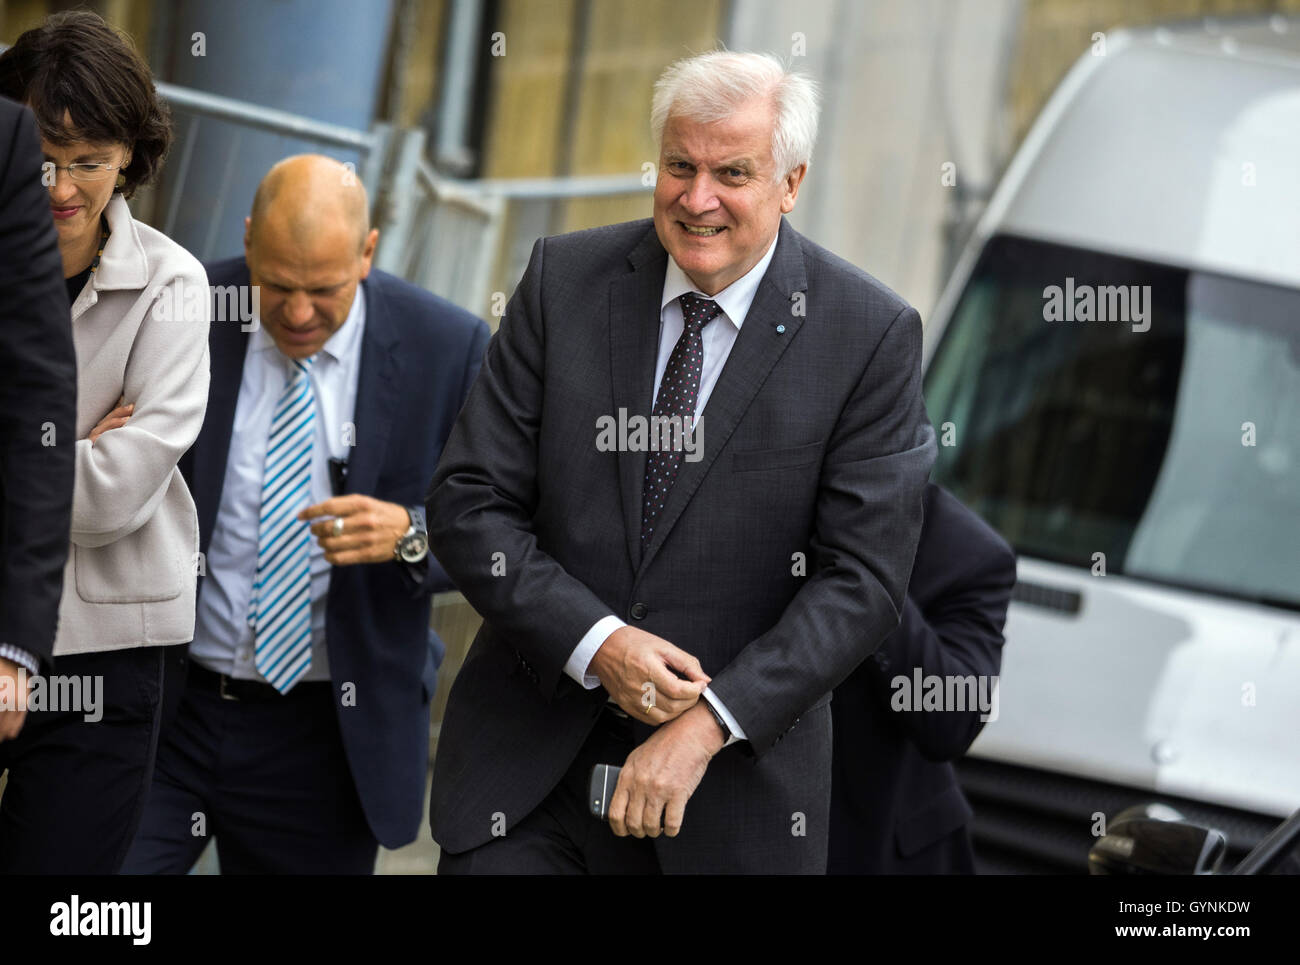 The Bavarian State Prime Minister, Horst Seehofer (CSU), arrives at at Kloster Banz near Bad Staffelstein, Germany, 19 Septemeber 2016. The traditional Autumn meeting of the CSU on Kloster Banz place this year under the motto 'Freiheit braucht Sicherheit' (lt.'Freedom needs security') and is running until 22 September 2016. Photo: NICOLAS ARMER/dpa Stock Photo